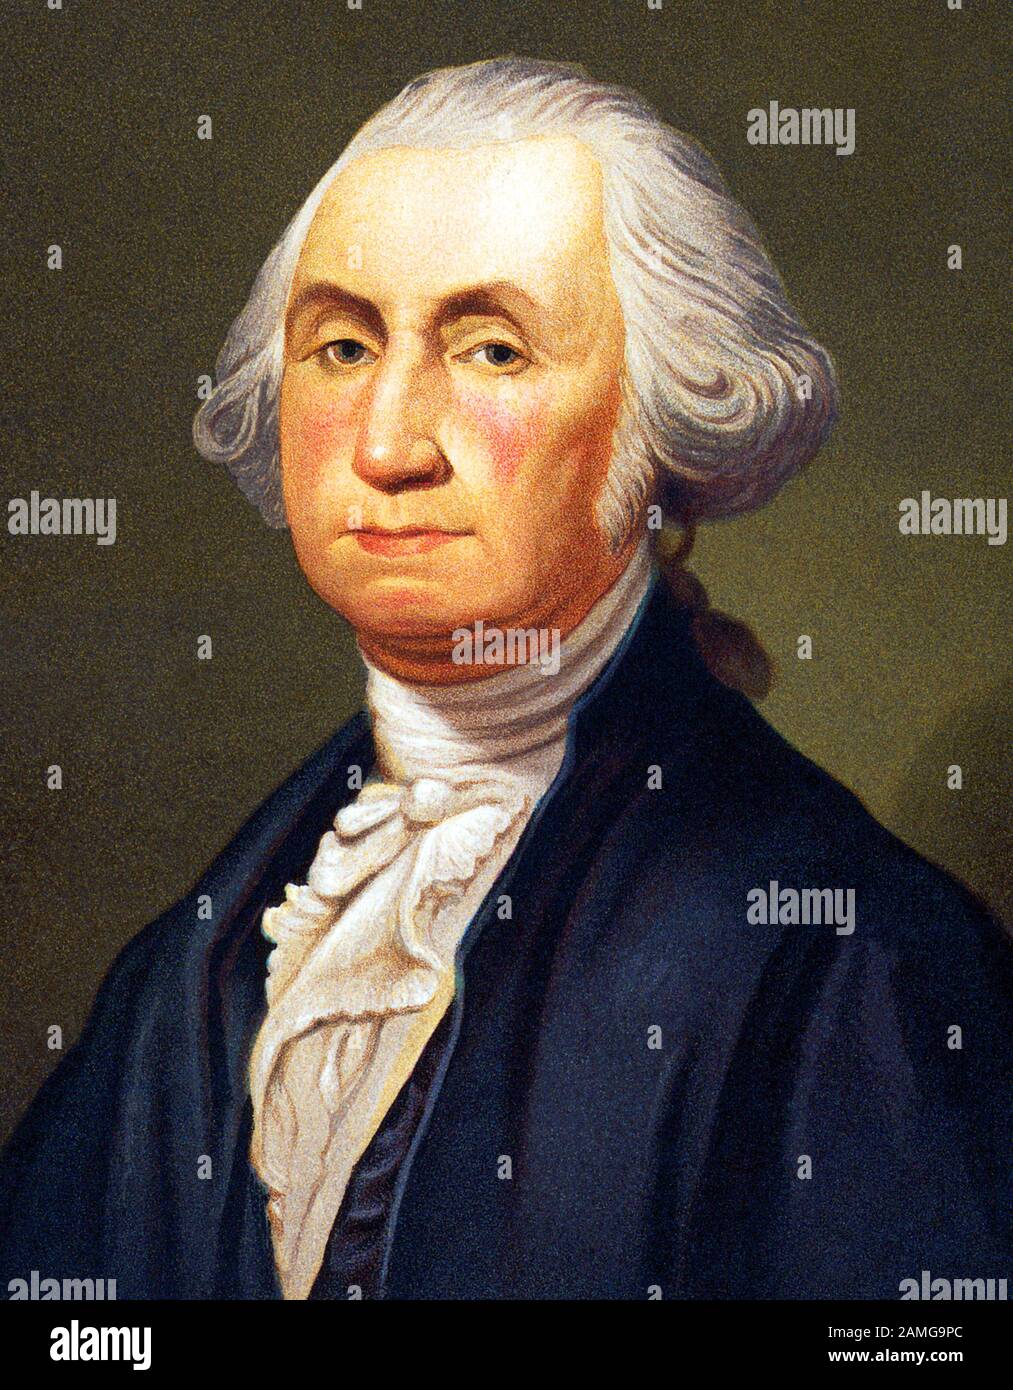 Vintage portrait of George Washington (1732 - 1799) – Commander of the Continental Army in the American Revolutionary War / War of Independence (1775 – 1783) and the first US President (1789 - 1797). Detail from a print circa 1876 by Strobridge & Co of Cincinnati. Stock Photo